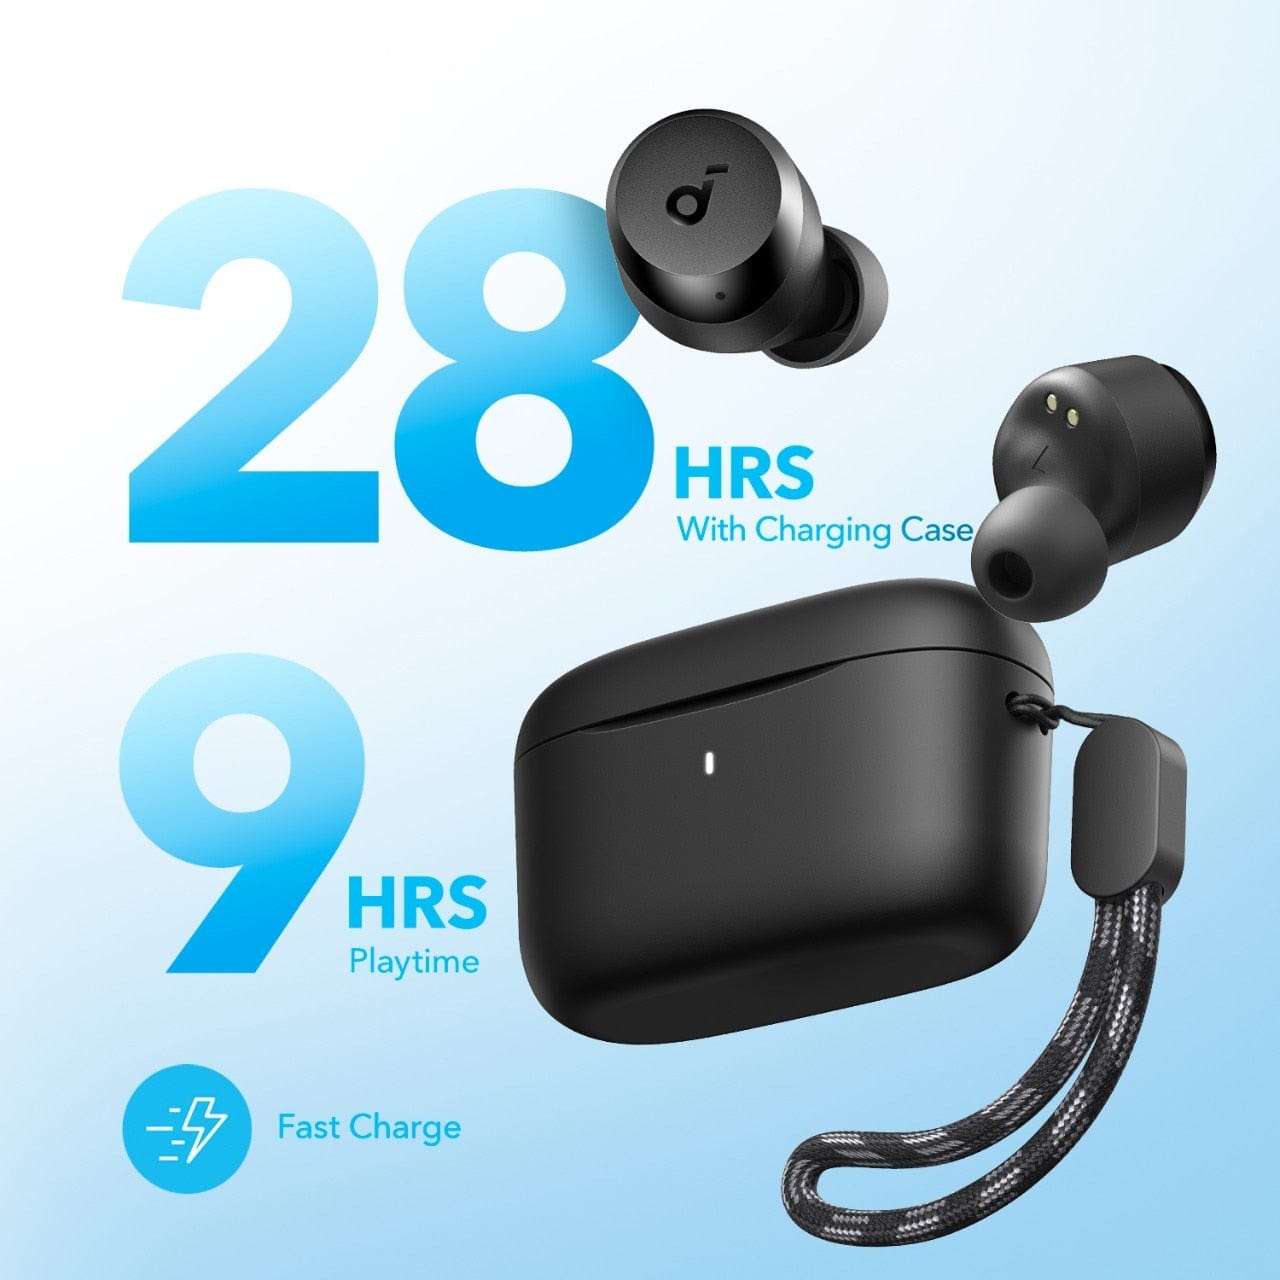 Soundcore Soundcore, Wireless Earbuds, Version A20i, Supports Bluetooth 5.3, Playtime up to 28 Hours, Color Black